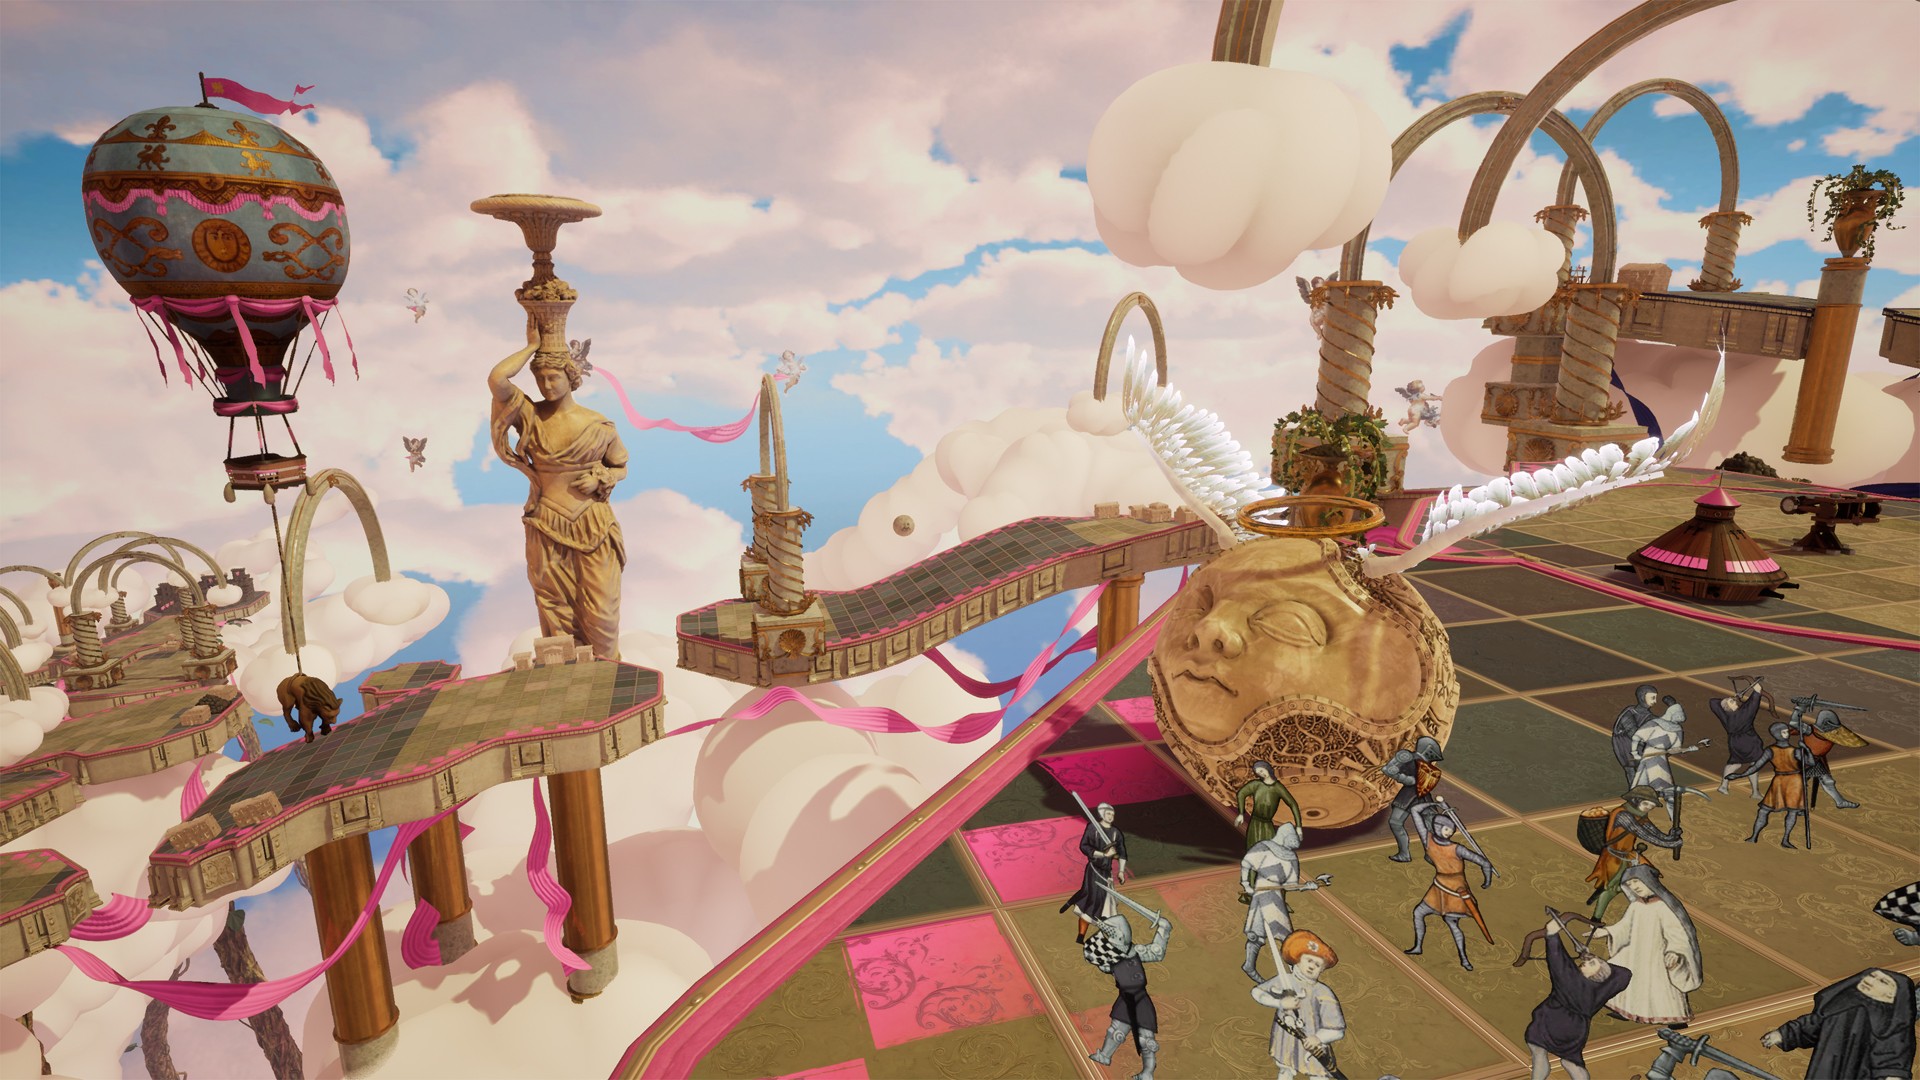 Best tower defense games: a pink embellished level in the clouds; a giant ornate ball with angel wings and a human face sits on a tiled path in Rock of Ages 2.